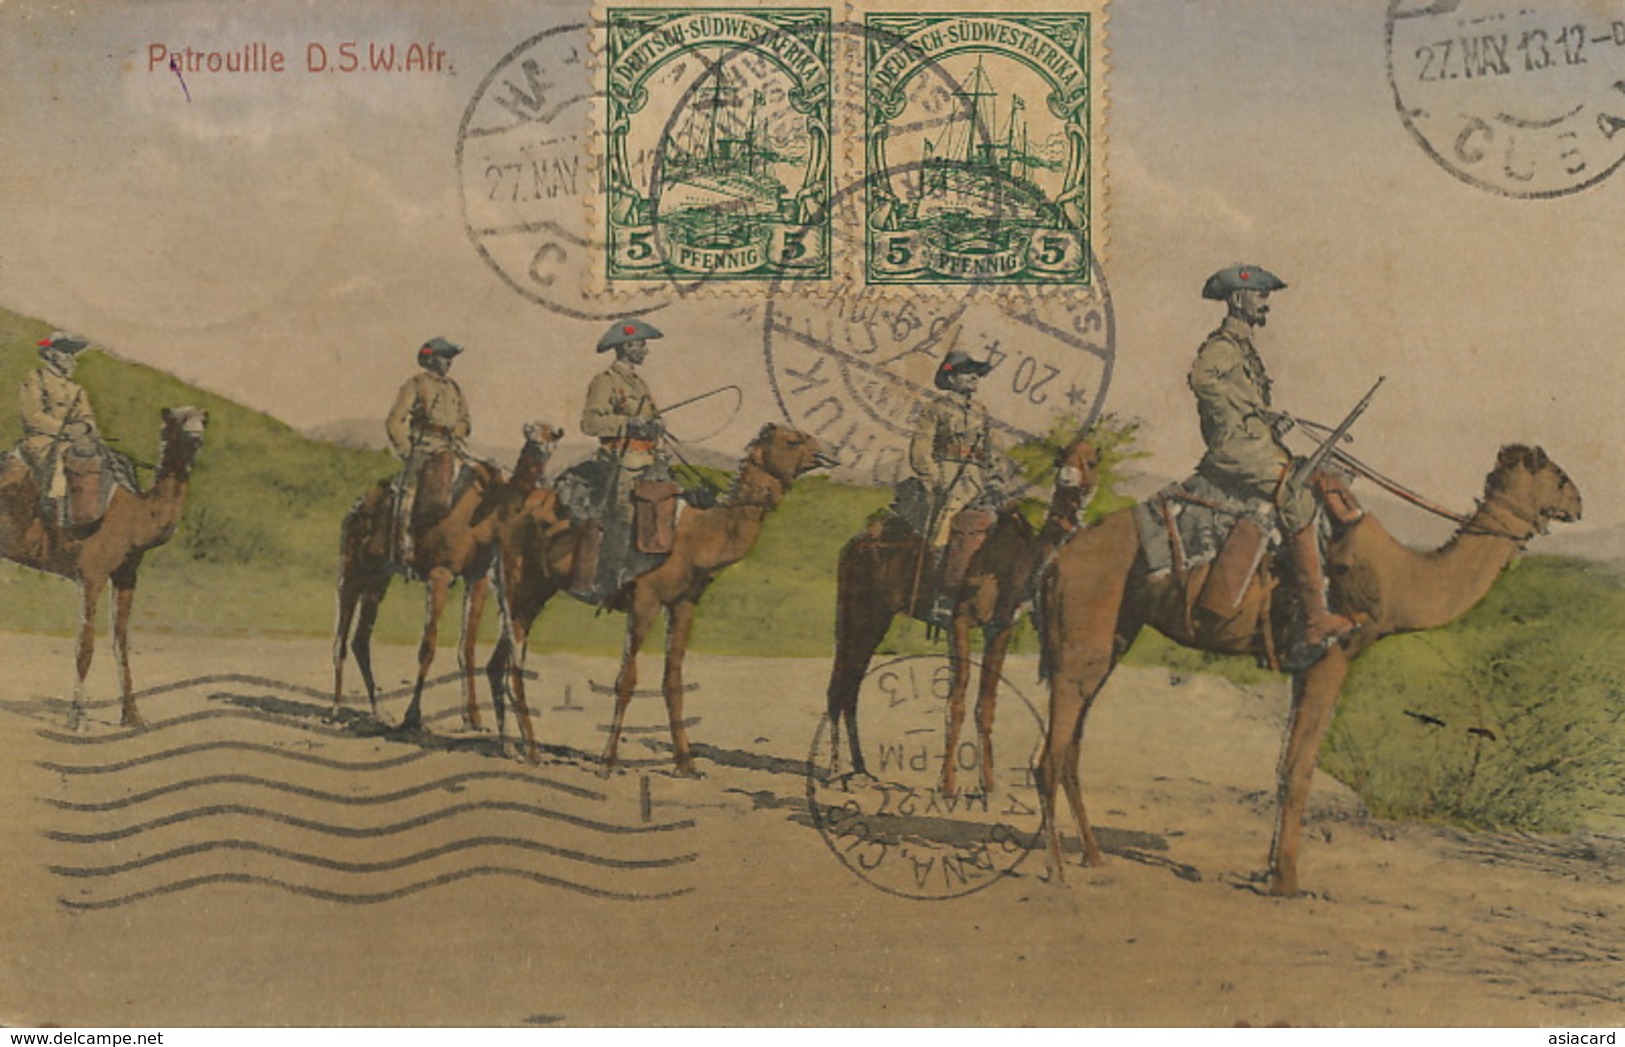 Camel Patrouille D.S.W. Afrika . German Stamps Windhuk To Cuba  Atelier Nink . - Namibia